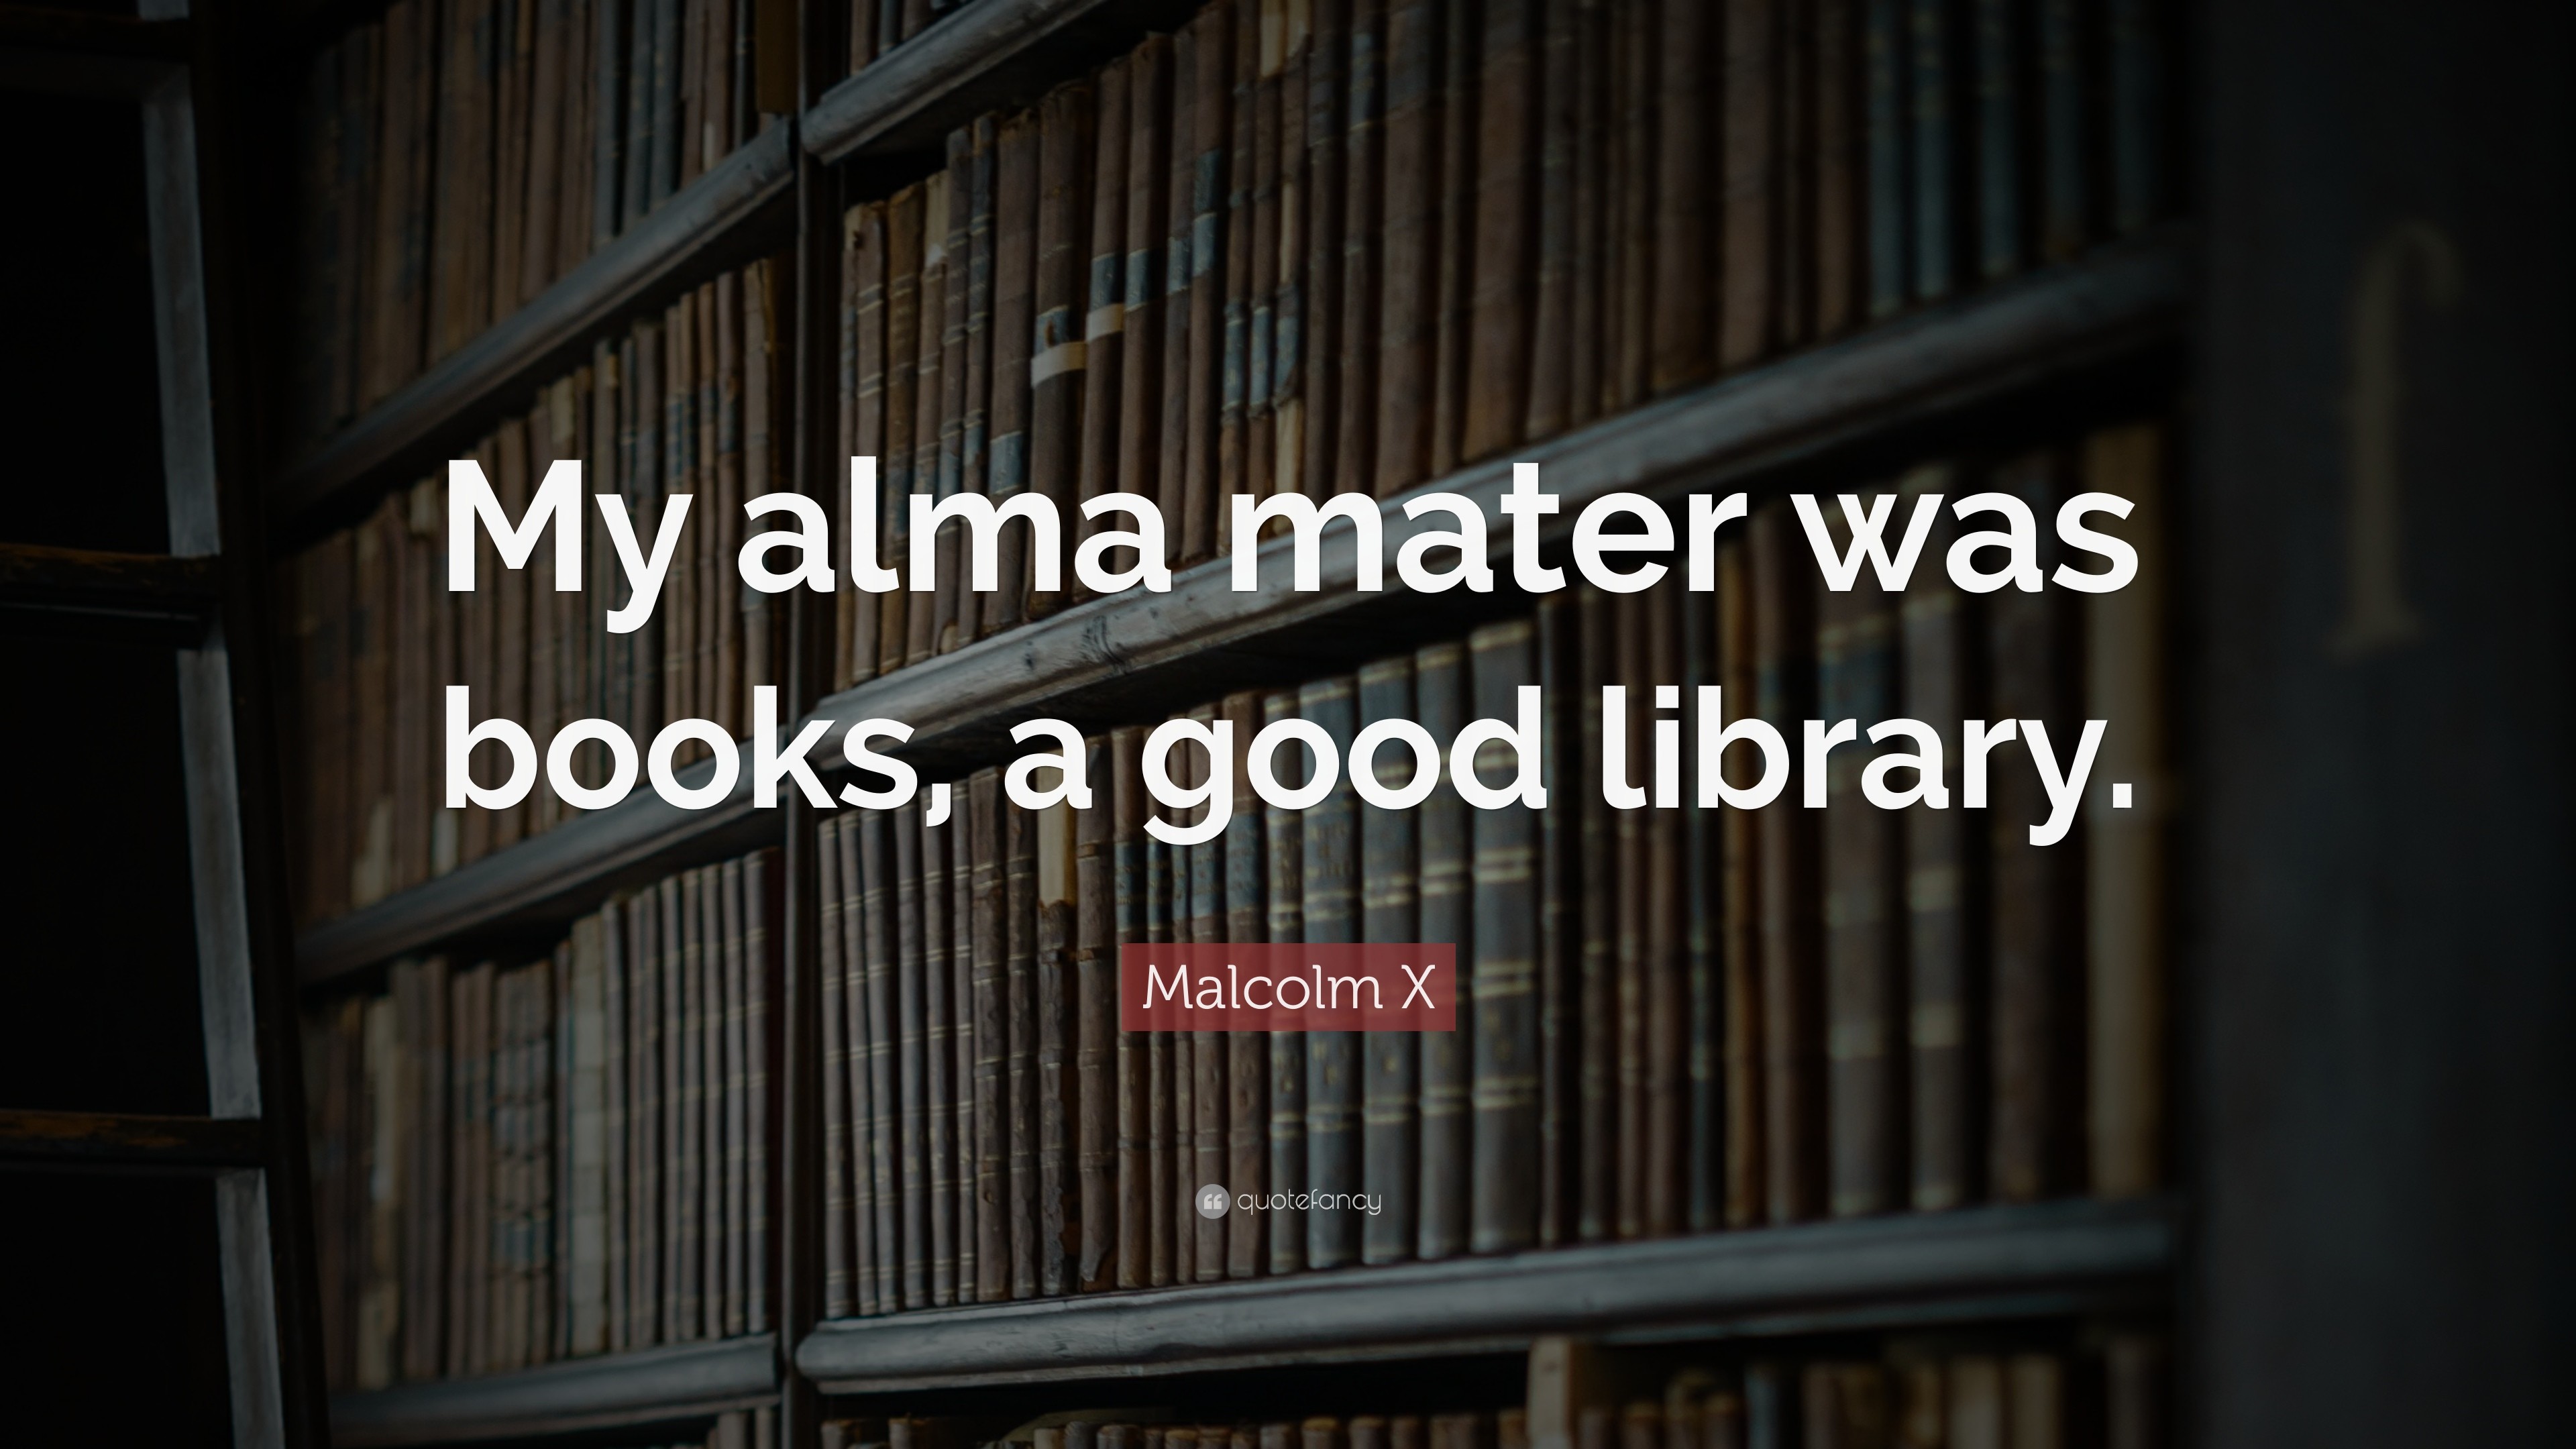 3840x2160 Malcolm X Quote: “My alma mater was books, a good library.”